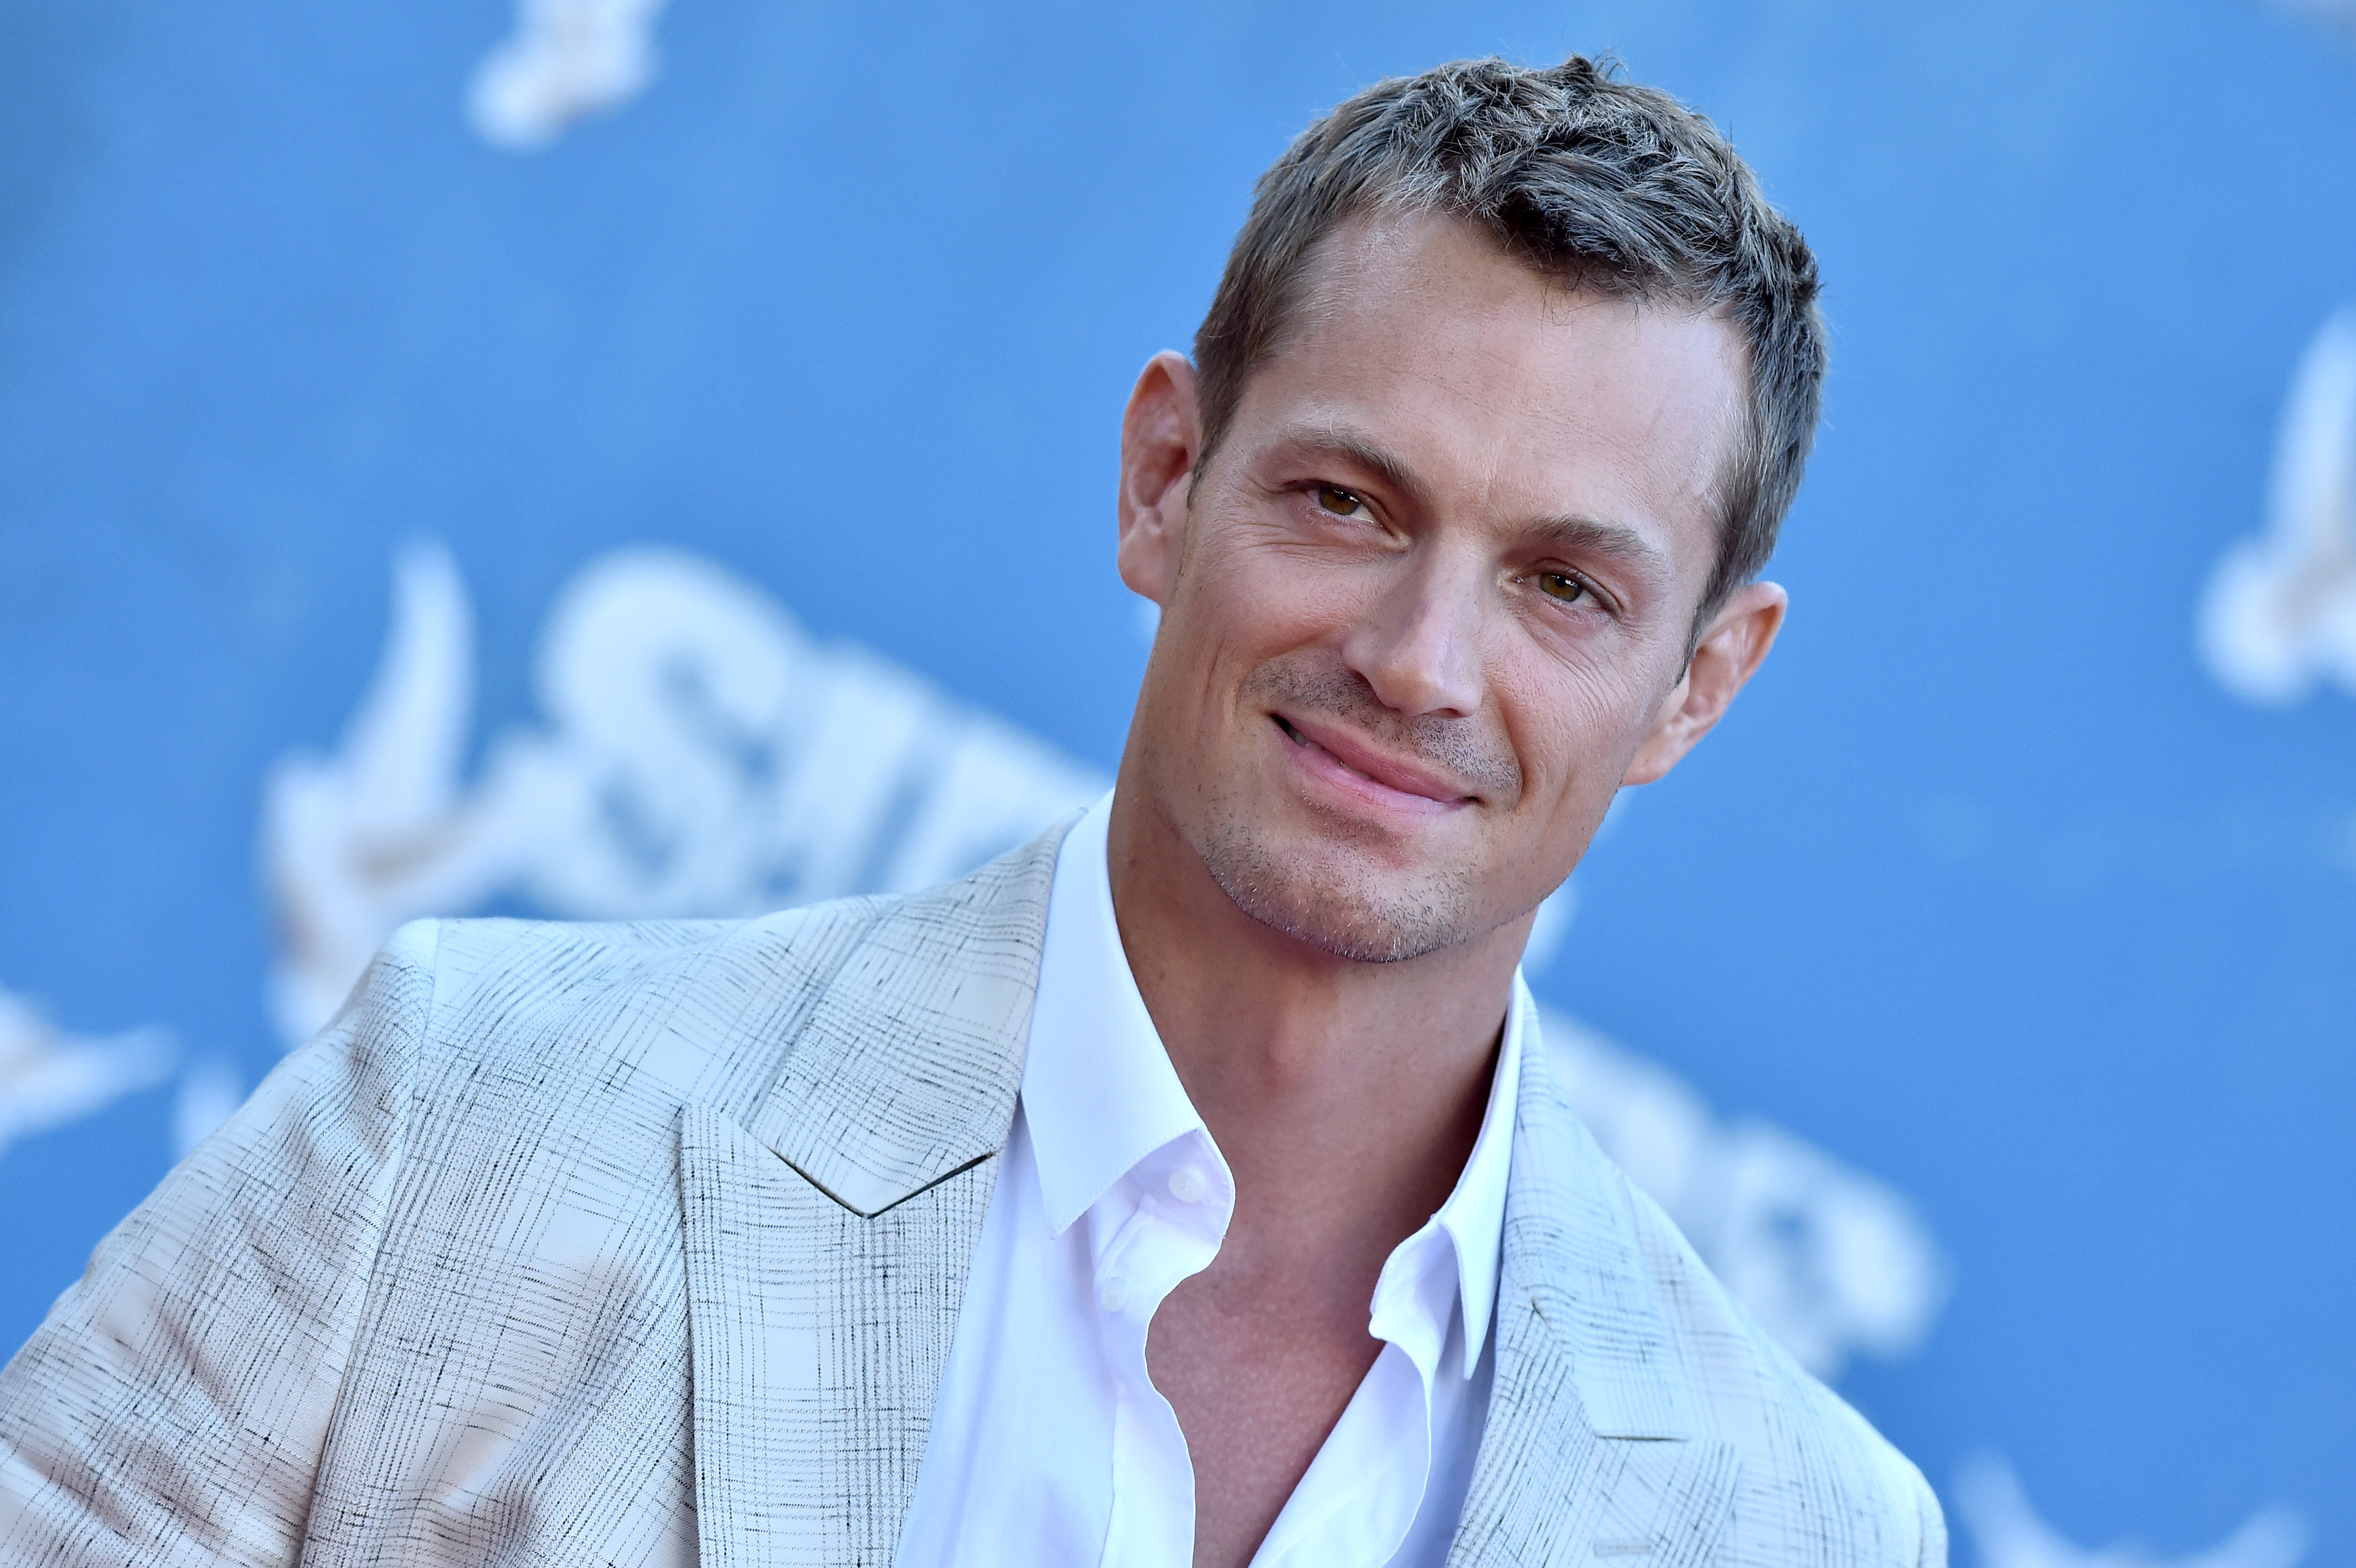 Joel Kinnaman attends Warner Bros. Premiere of "The Suicide Squad" at The Landmark Westwood on August 2, 2021, in Los Angeles, California. | Source: Getty Images